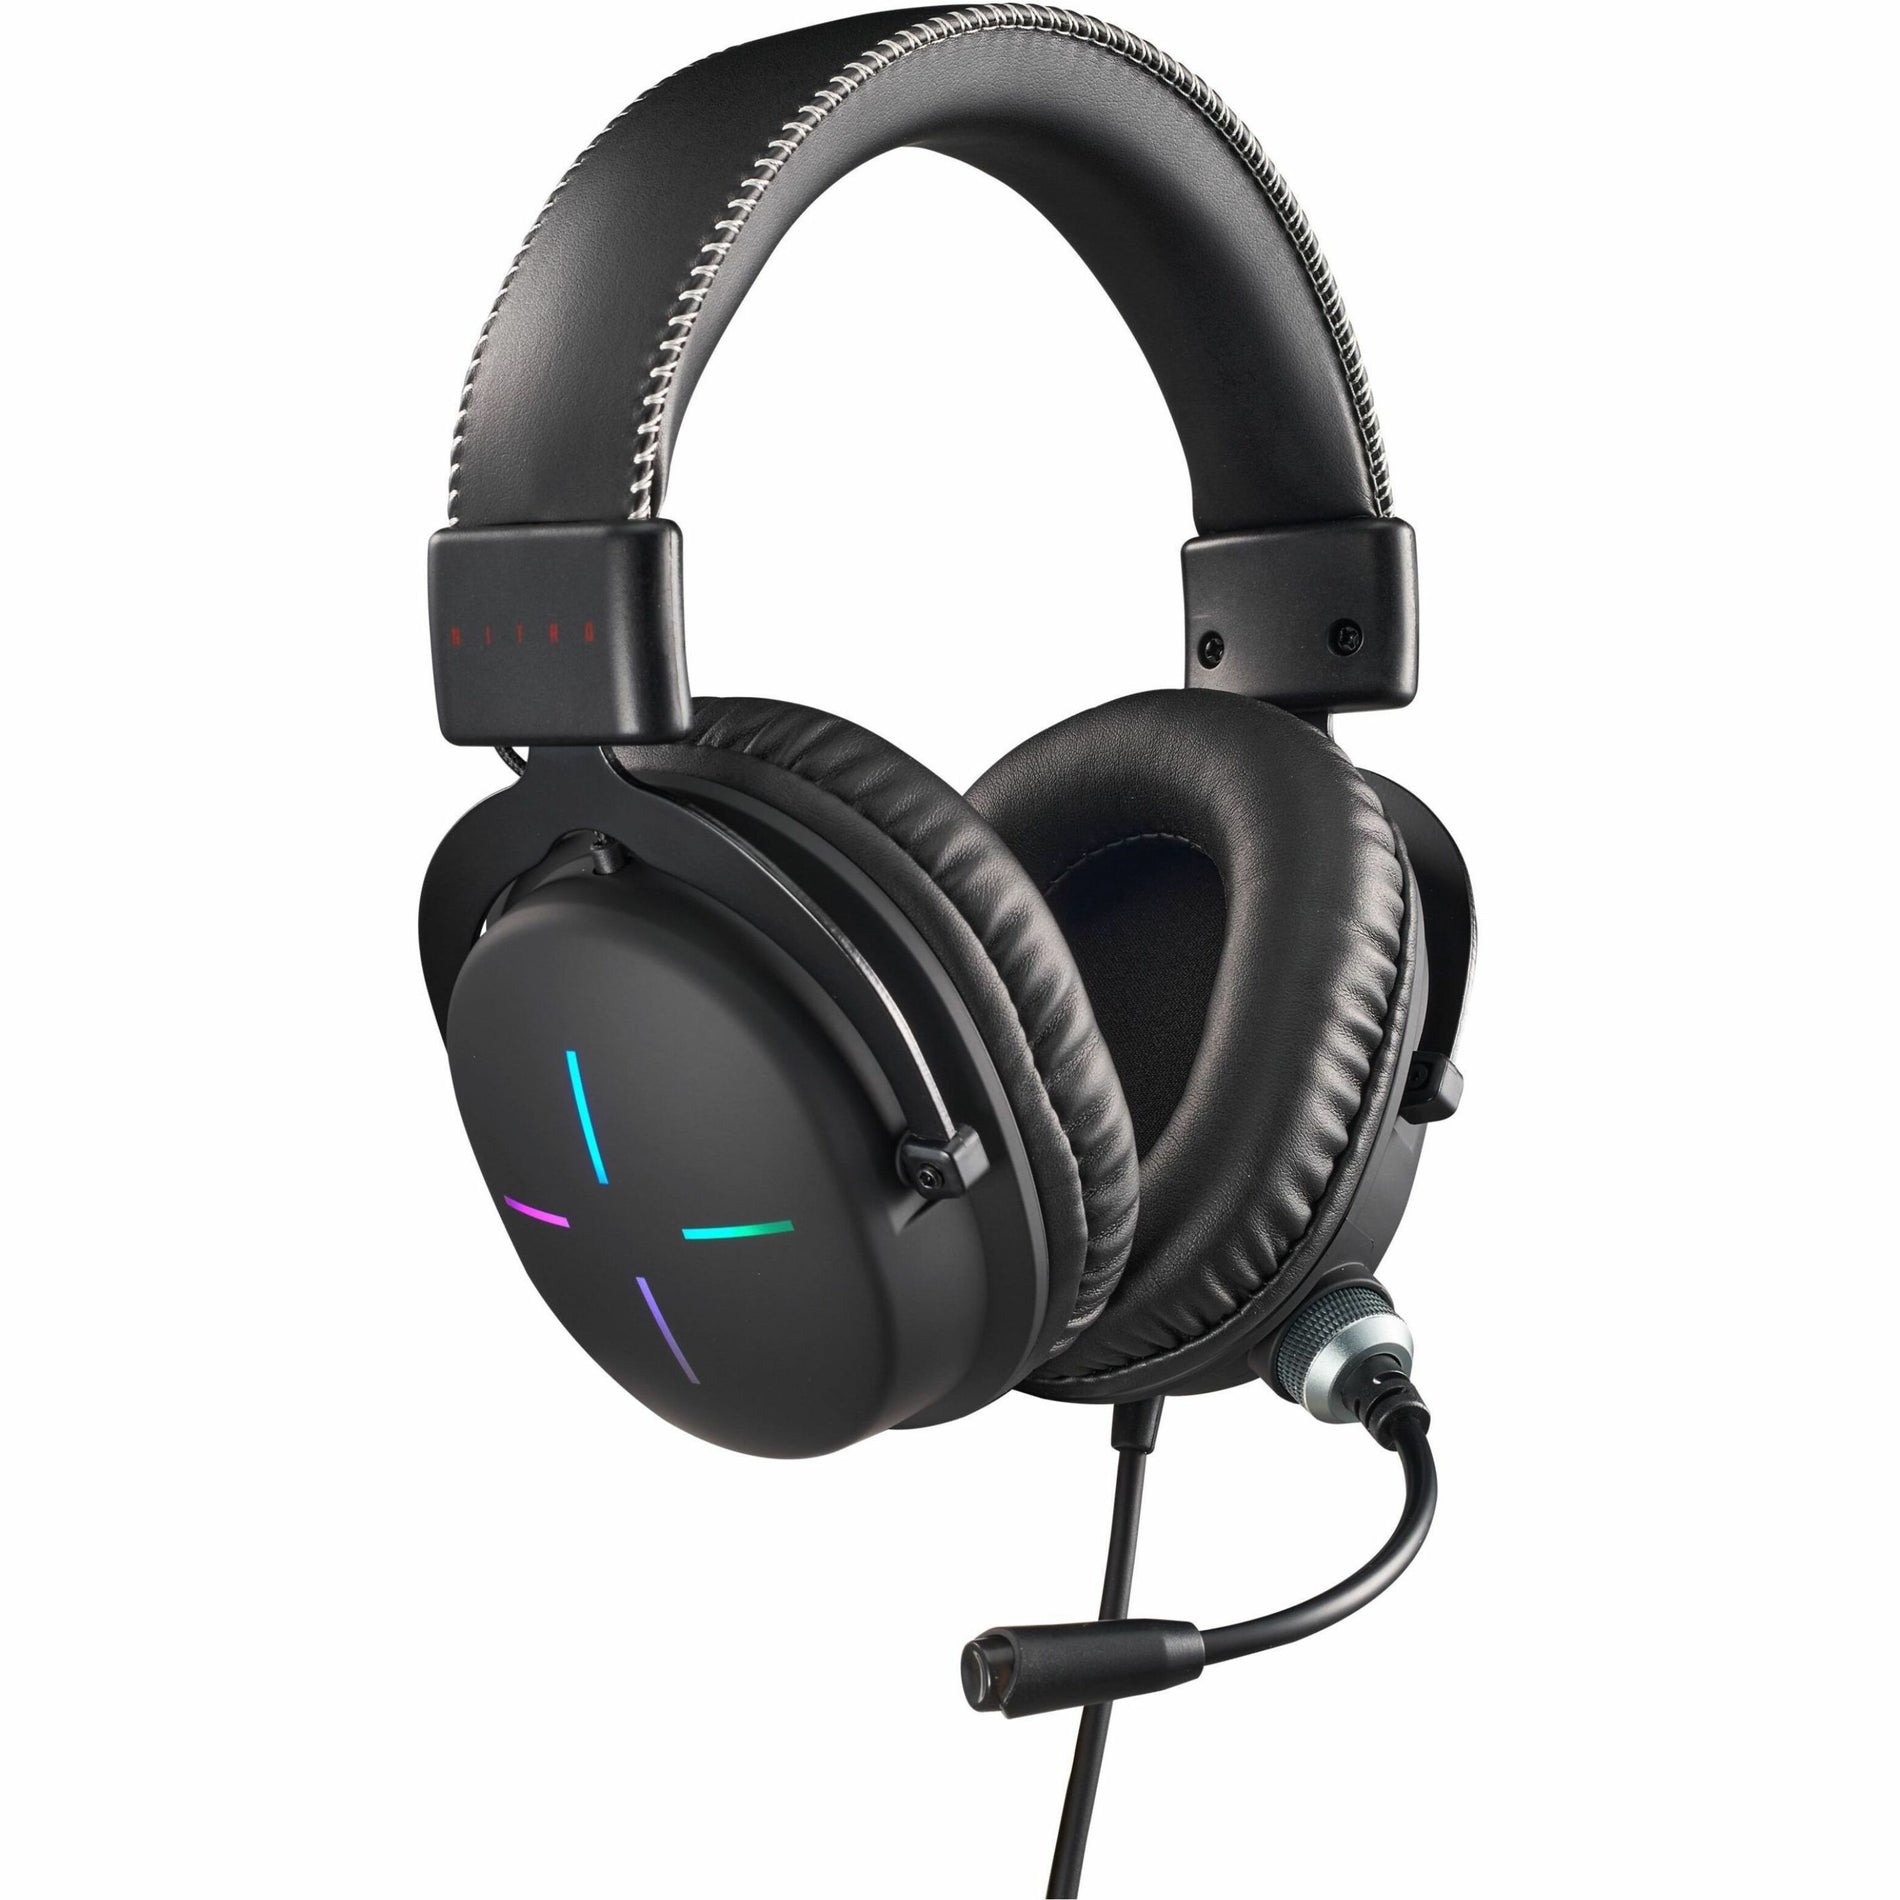 Acer GP.HDS11.01I Nitro Gaming Headset, Binaural Over-the-head Stereo Wired Headset for Gaming